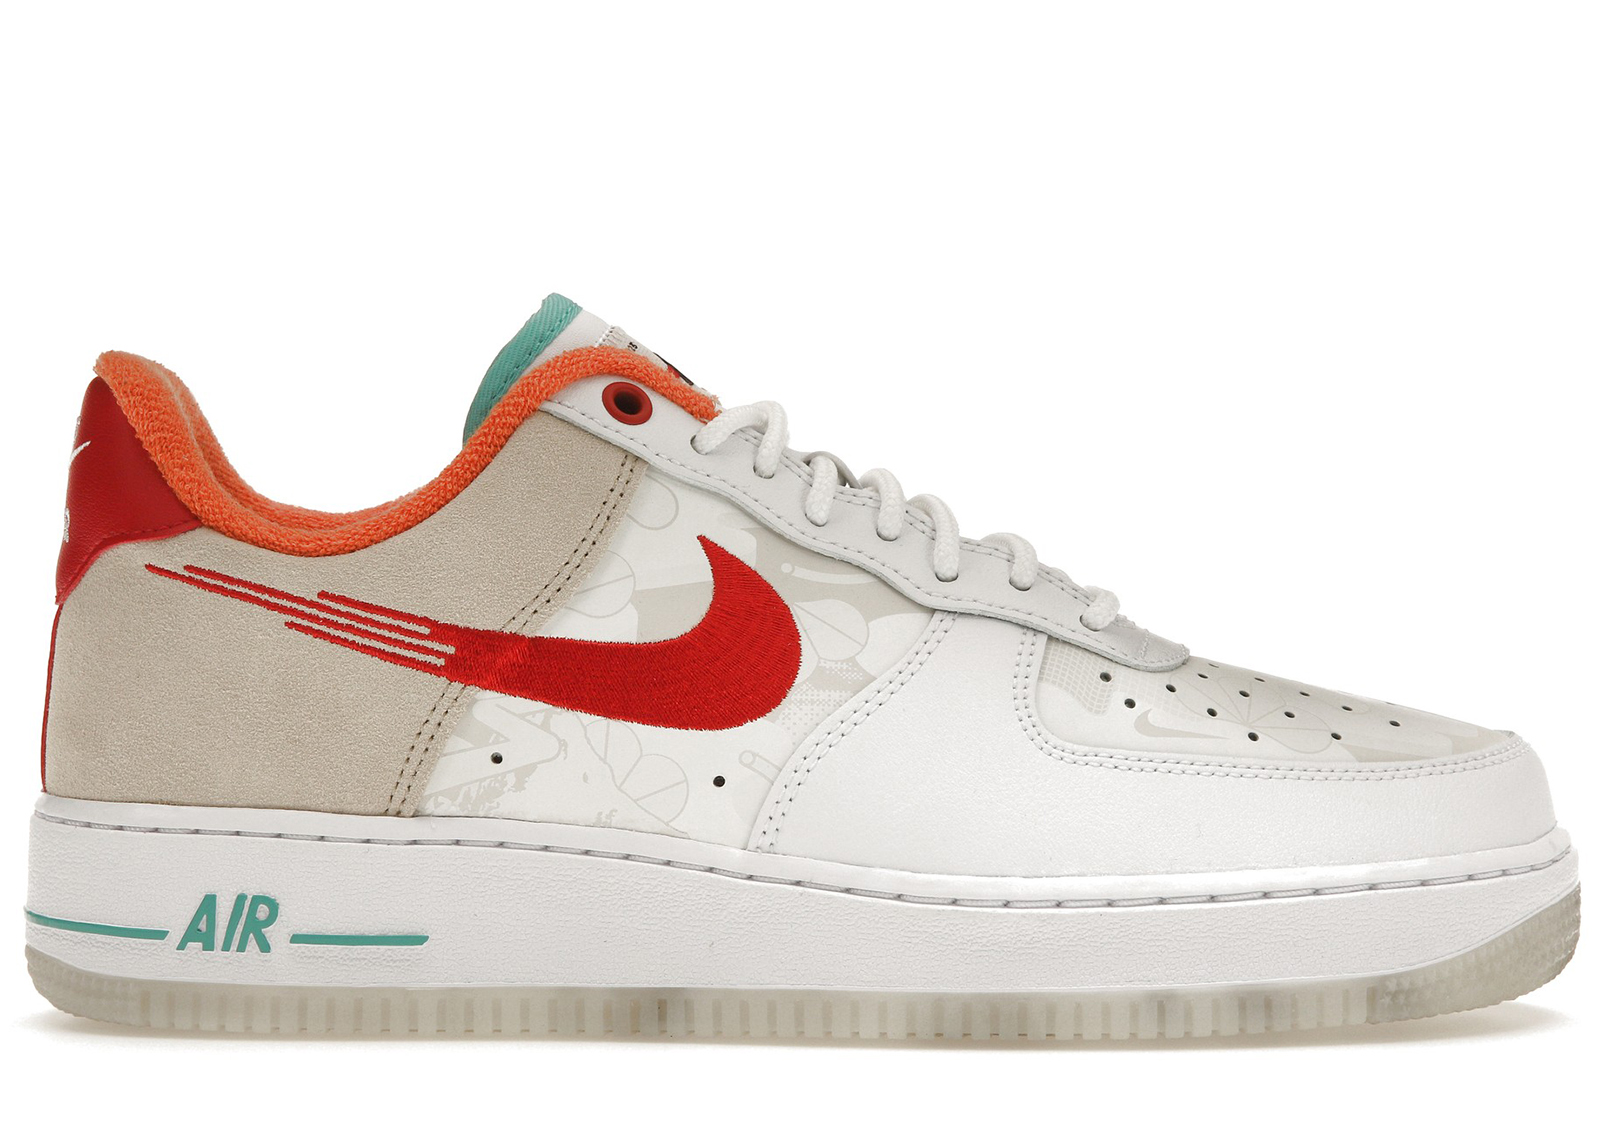 Nike Air Force 1 Low '07 PRM Just Do It White Red Teal Men's 